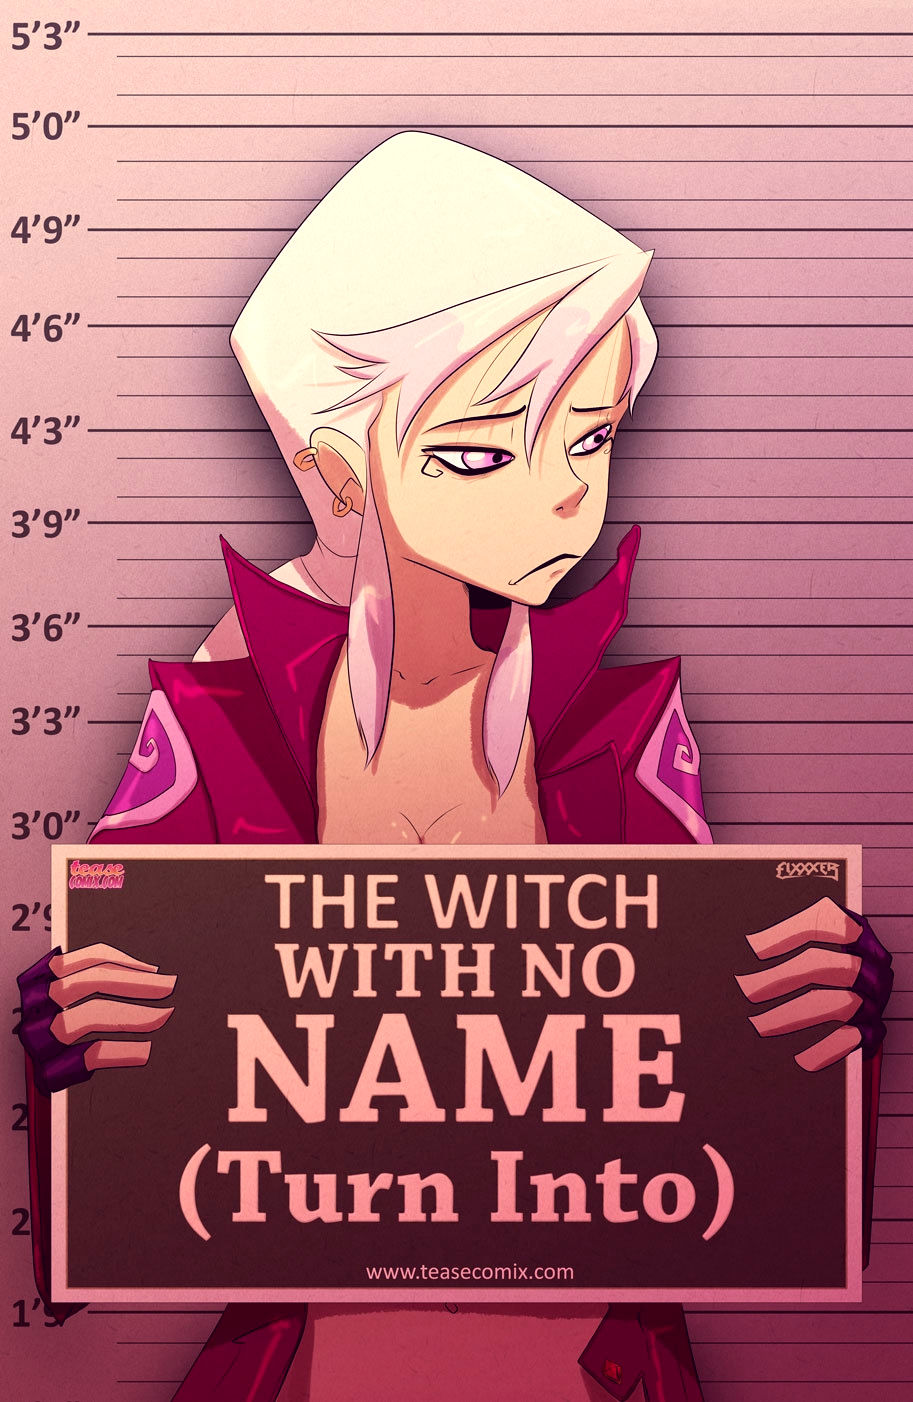 The Witch With No Name (Turn Into)